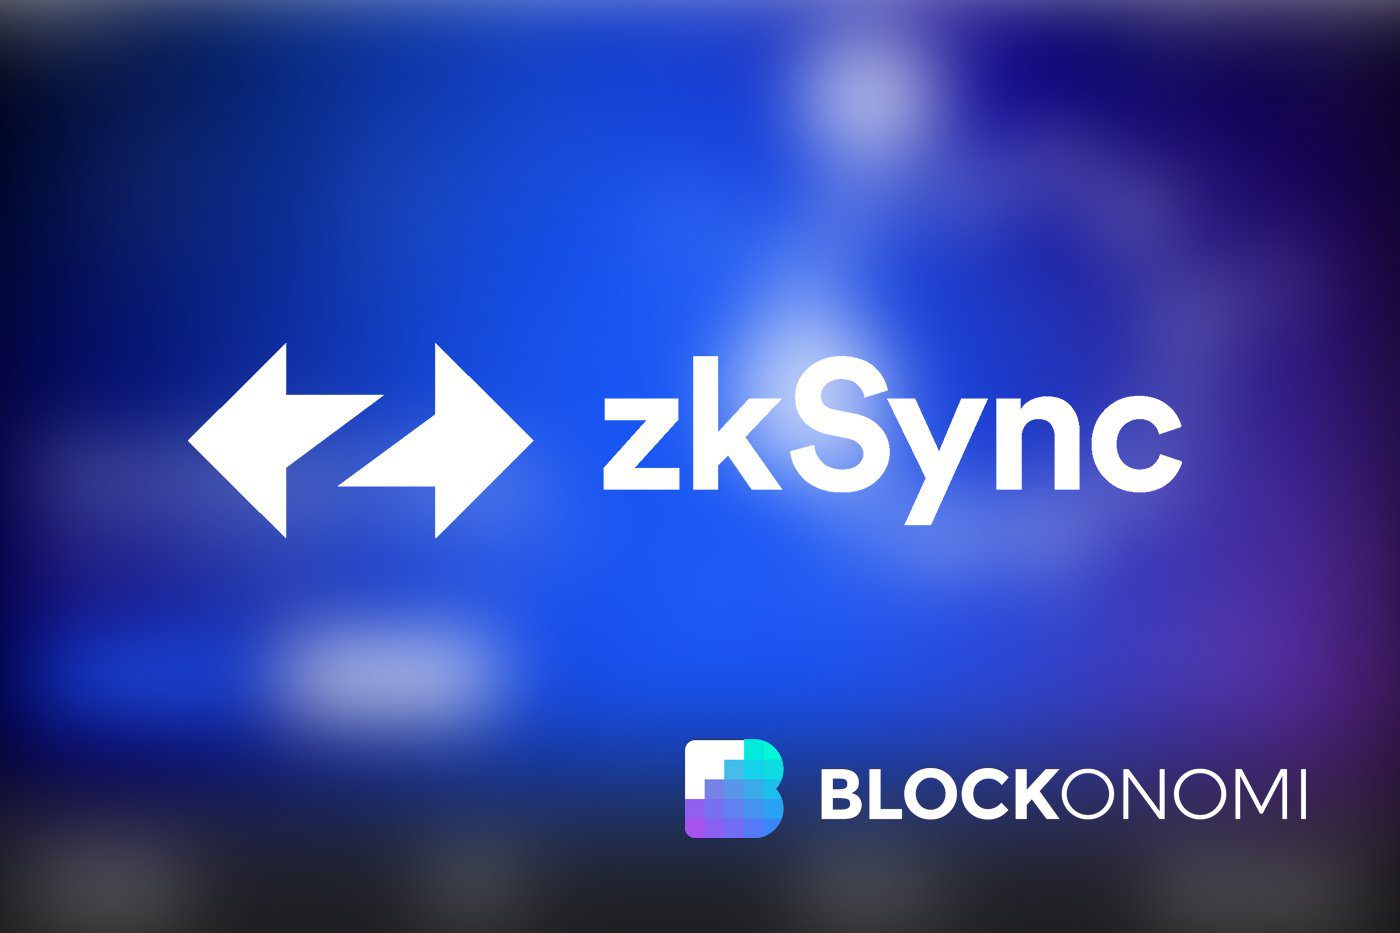 zkSync's ZK Token Airdrop Sparks Controversy Over Sybil Filtering